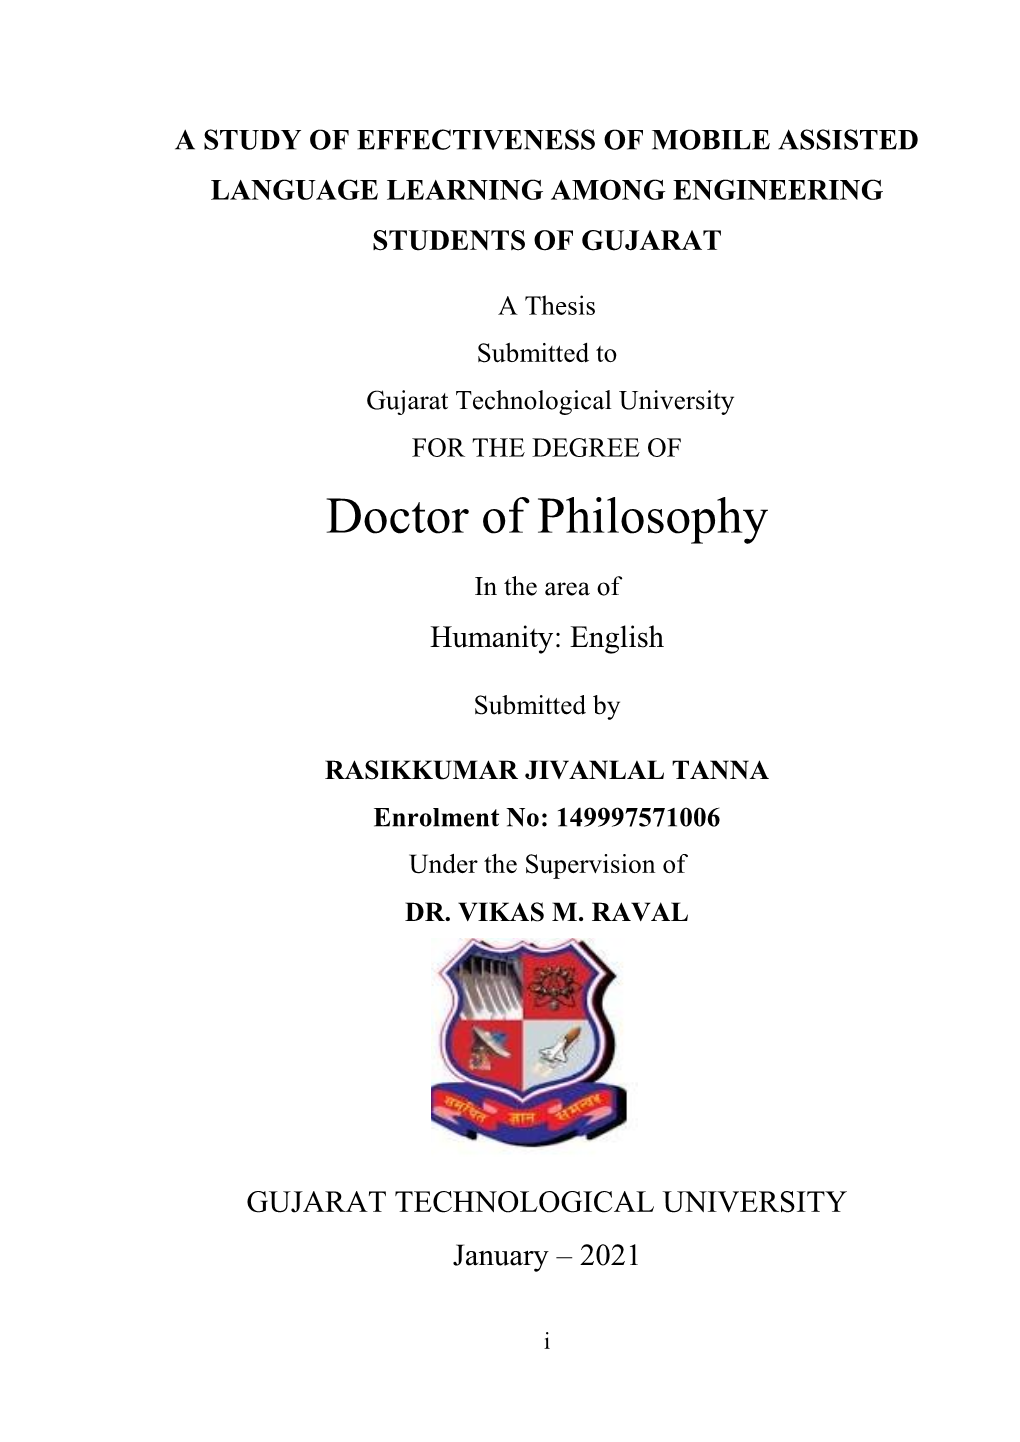 Thesis Submitted to Gujarat Technological University for the DEGREE of Doctor of Philosophy